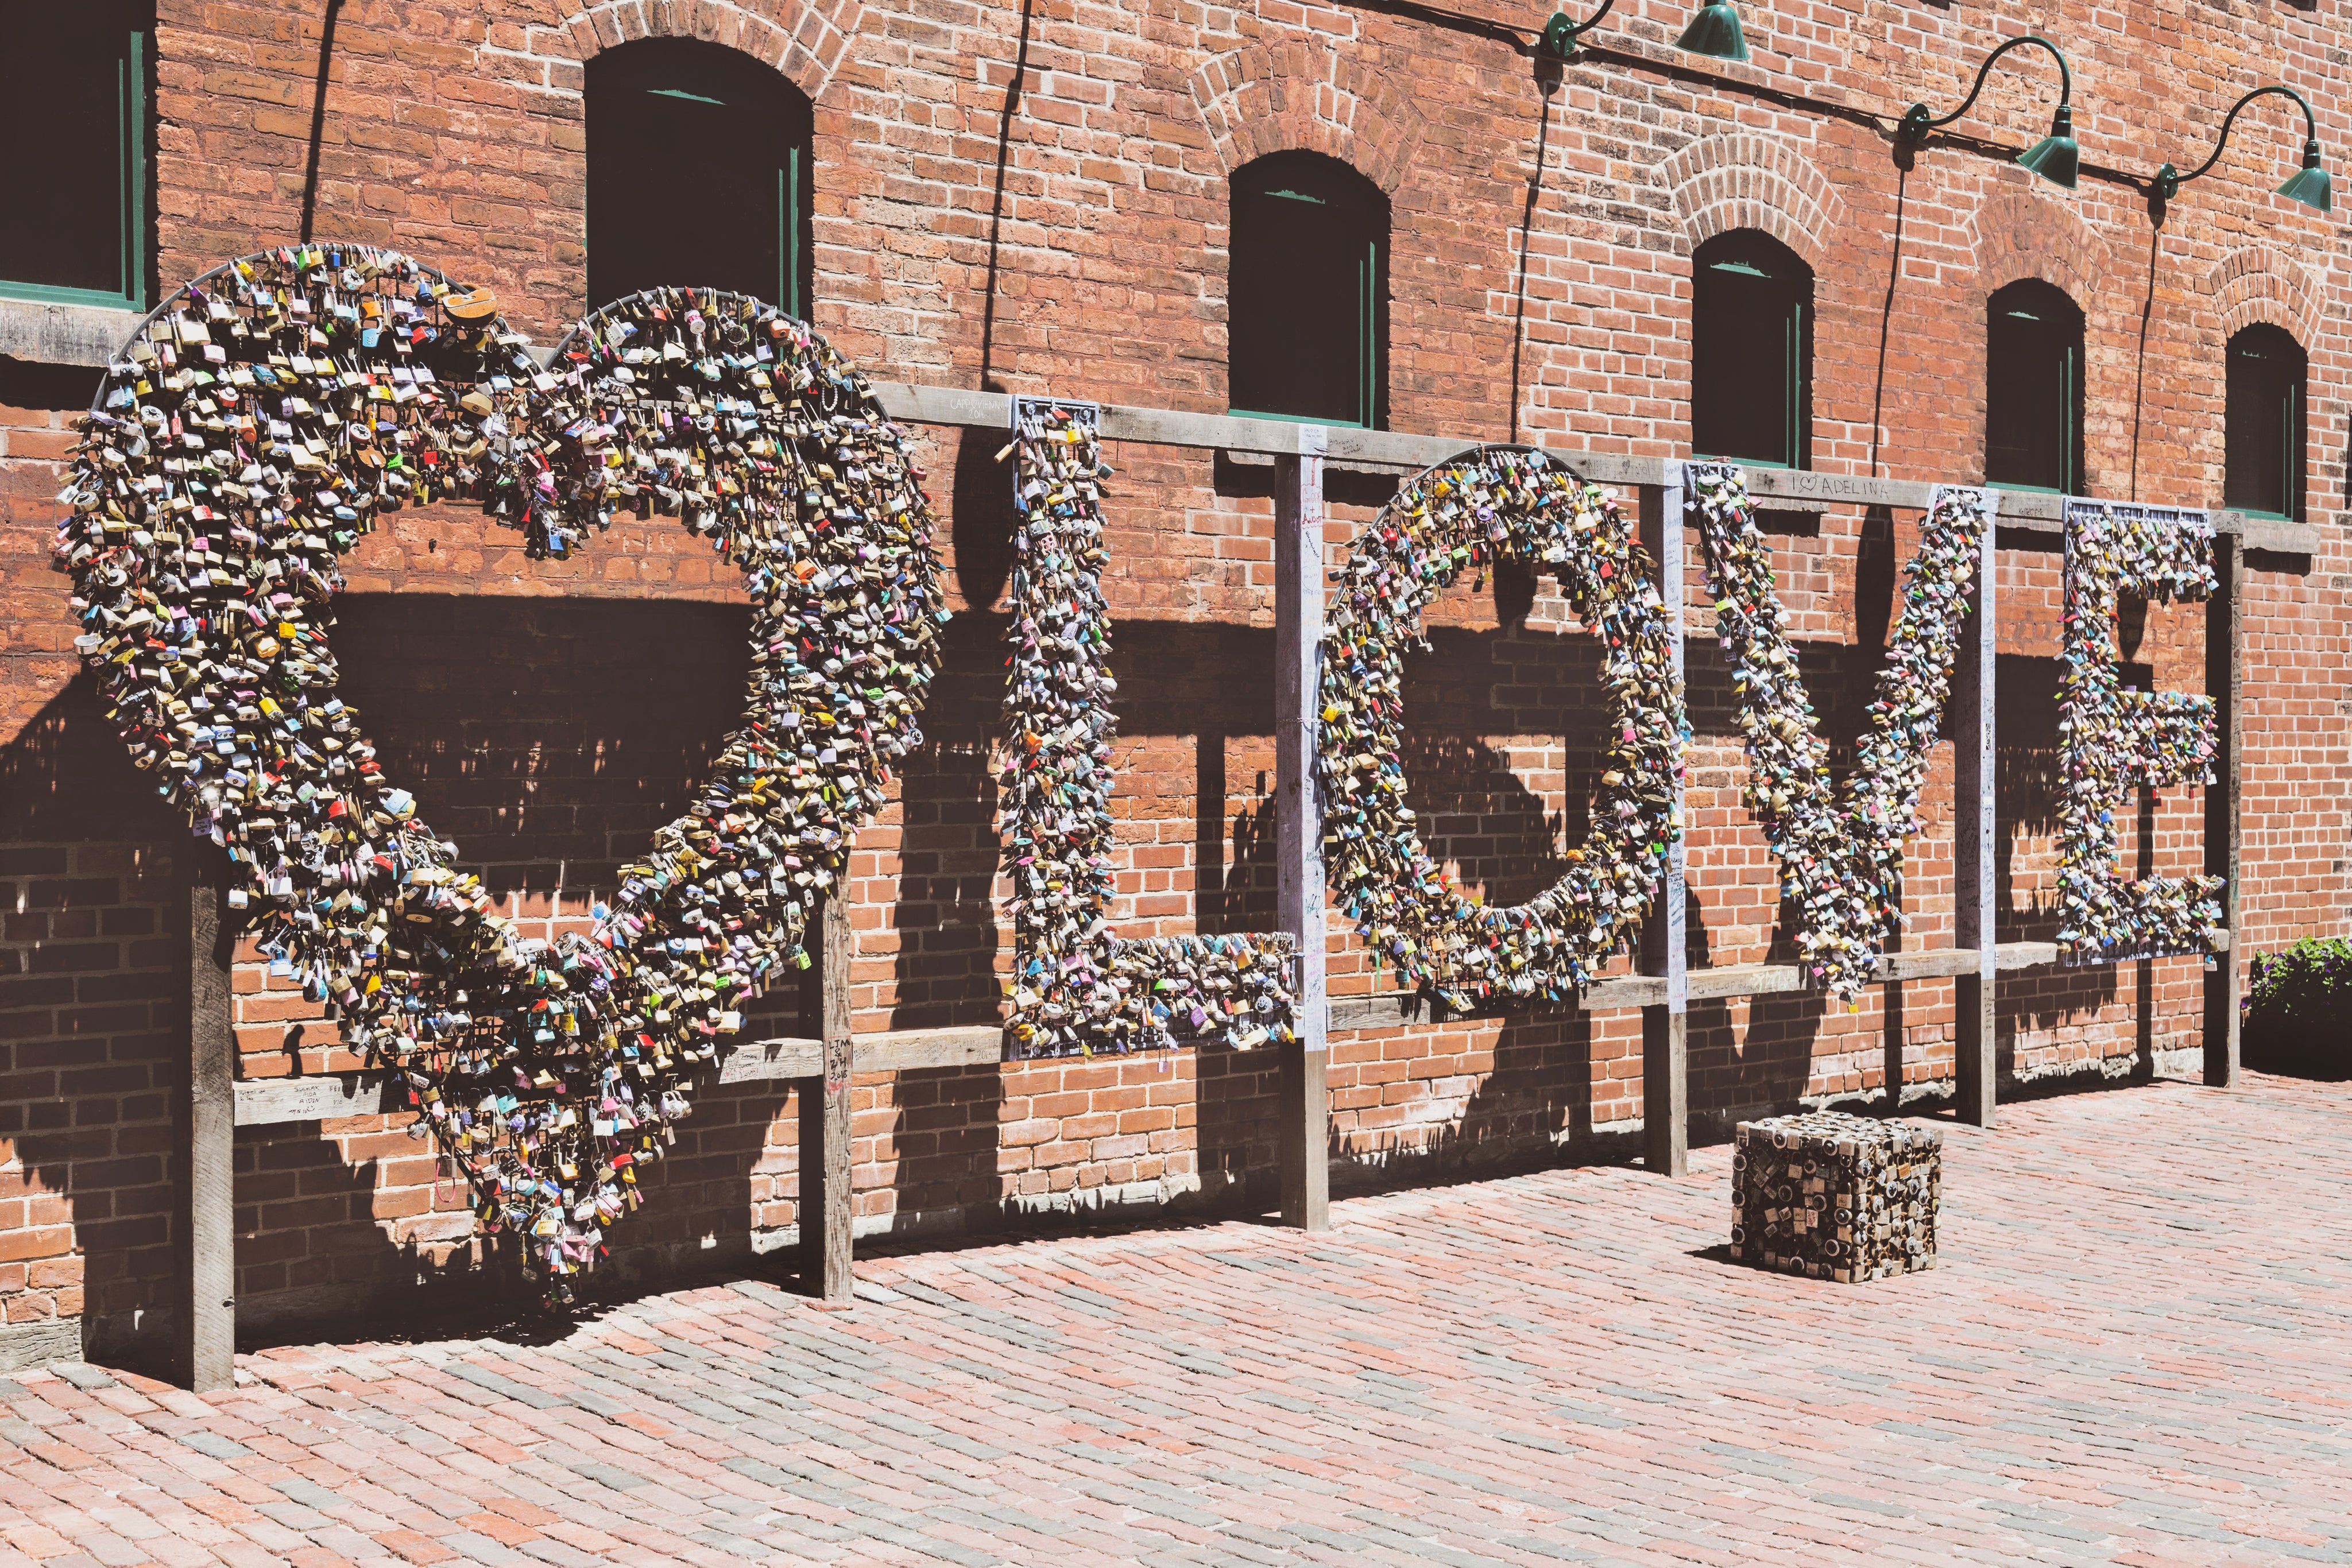 Sign saying LOVE set against a brick building